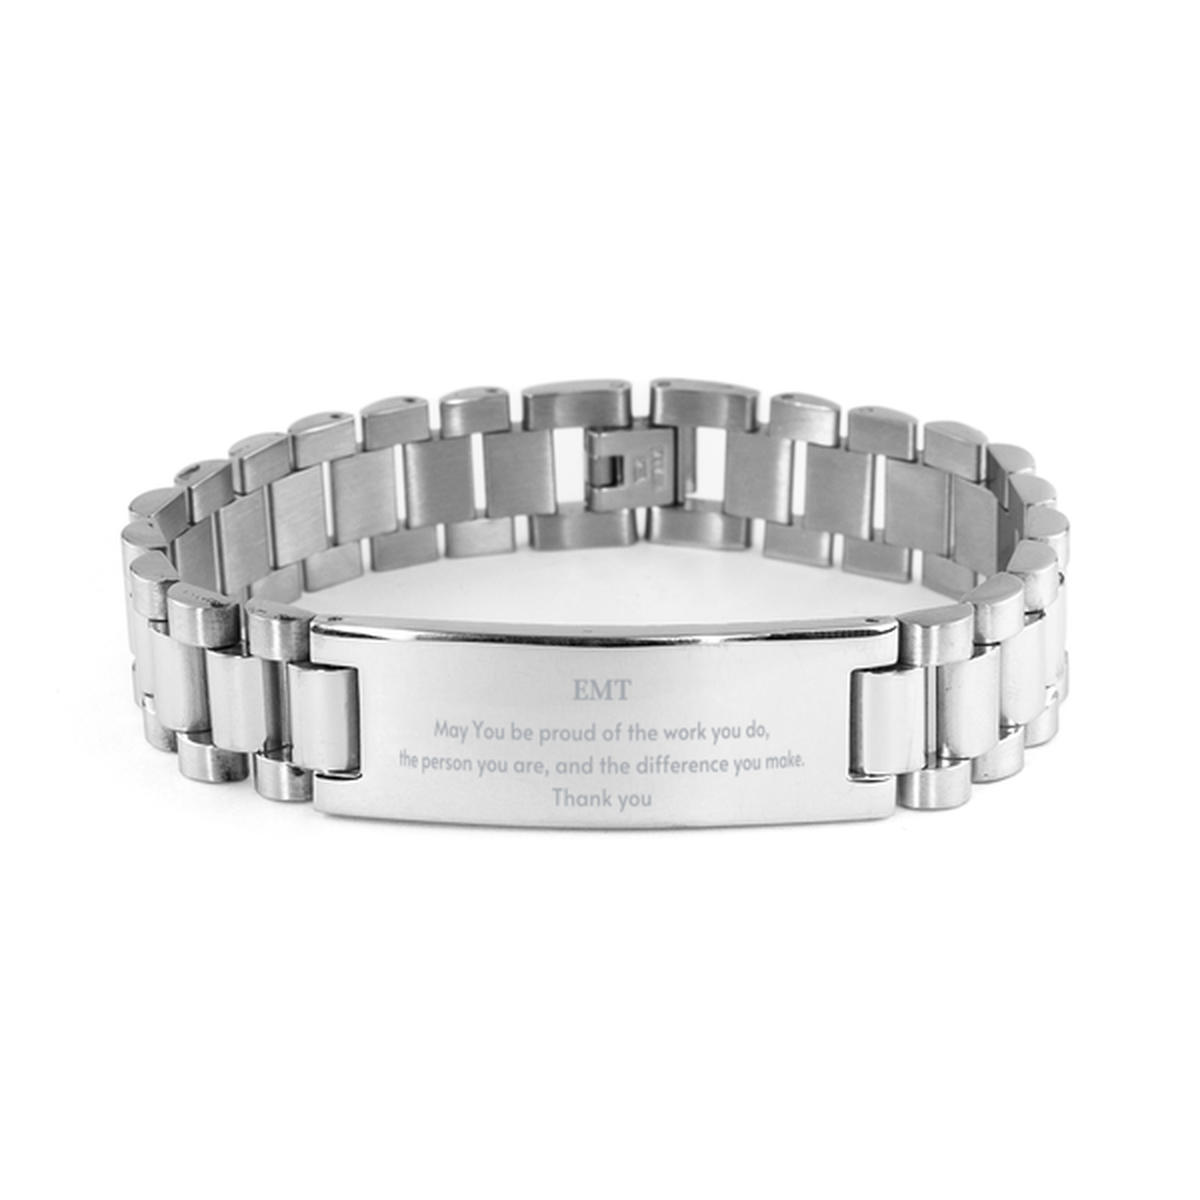 Heartwarming Ladder Stainless Steel Bracelet Retirement Coworkers Gifts for EMT, EMT May You be proud of the work you do, the person you are Gifts for Boss Men Women Friends